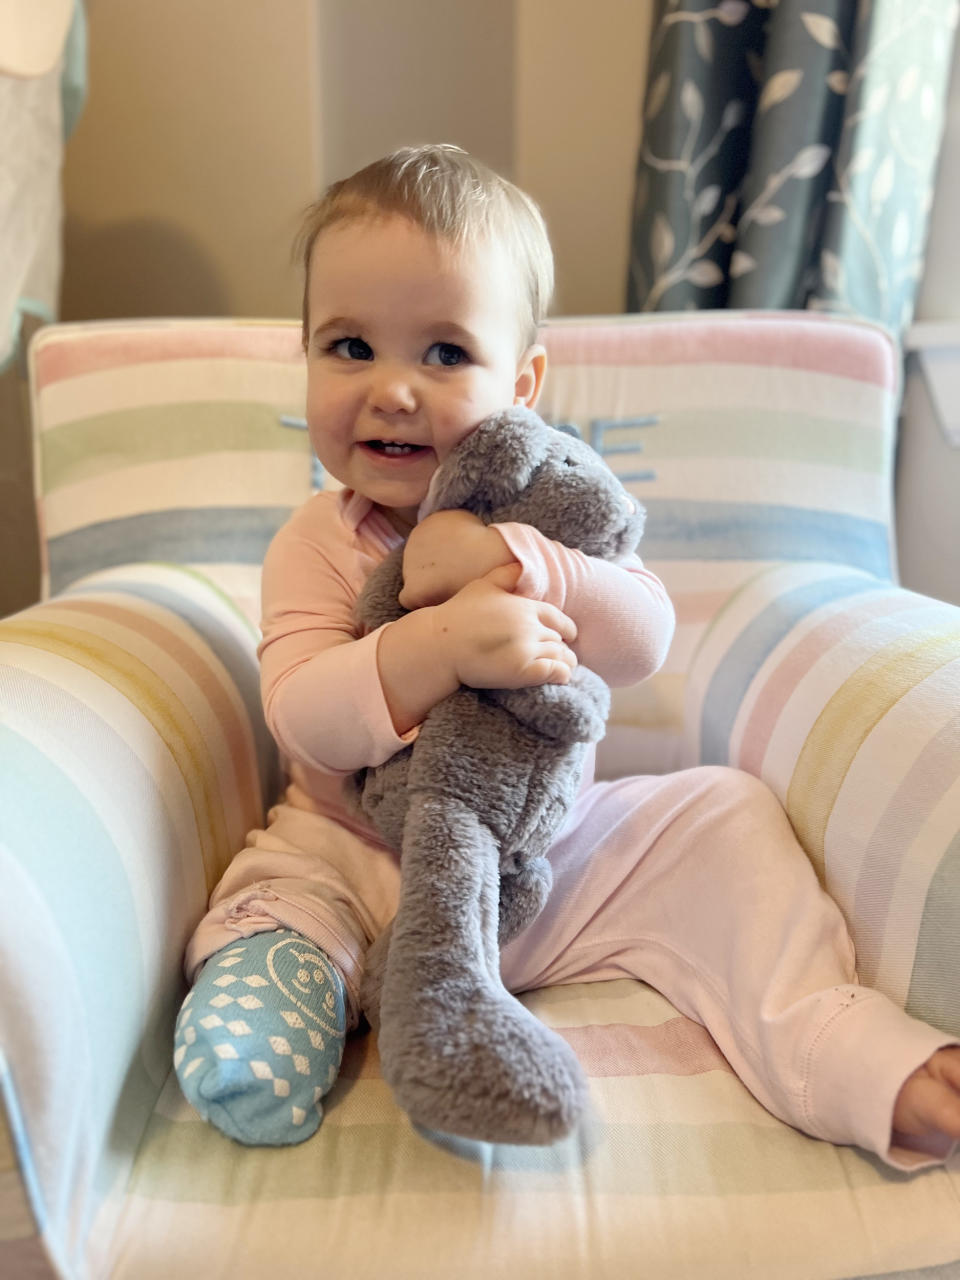 2022 Gerber Baby Isa Slish is ready to hand over the title (but maybe not that stuffed animal). (Courtesy John and Meredith Slish)